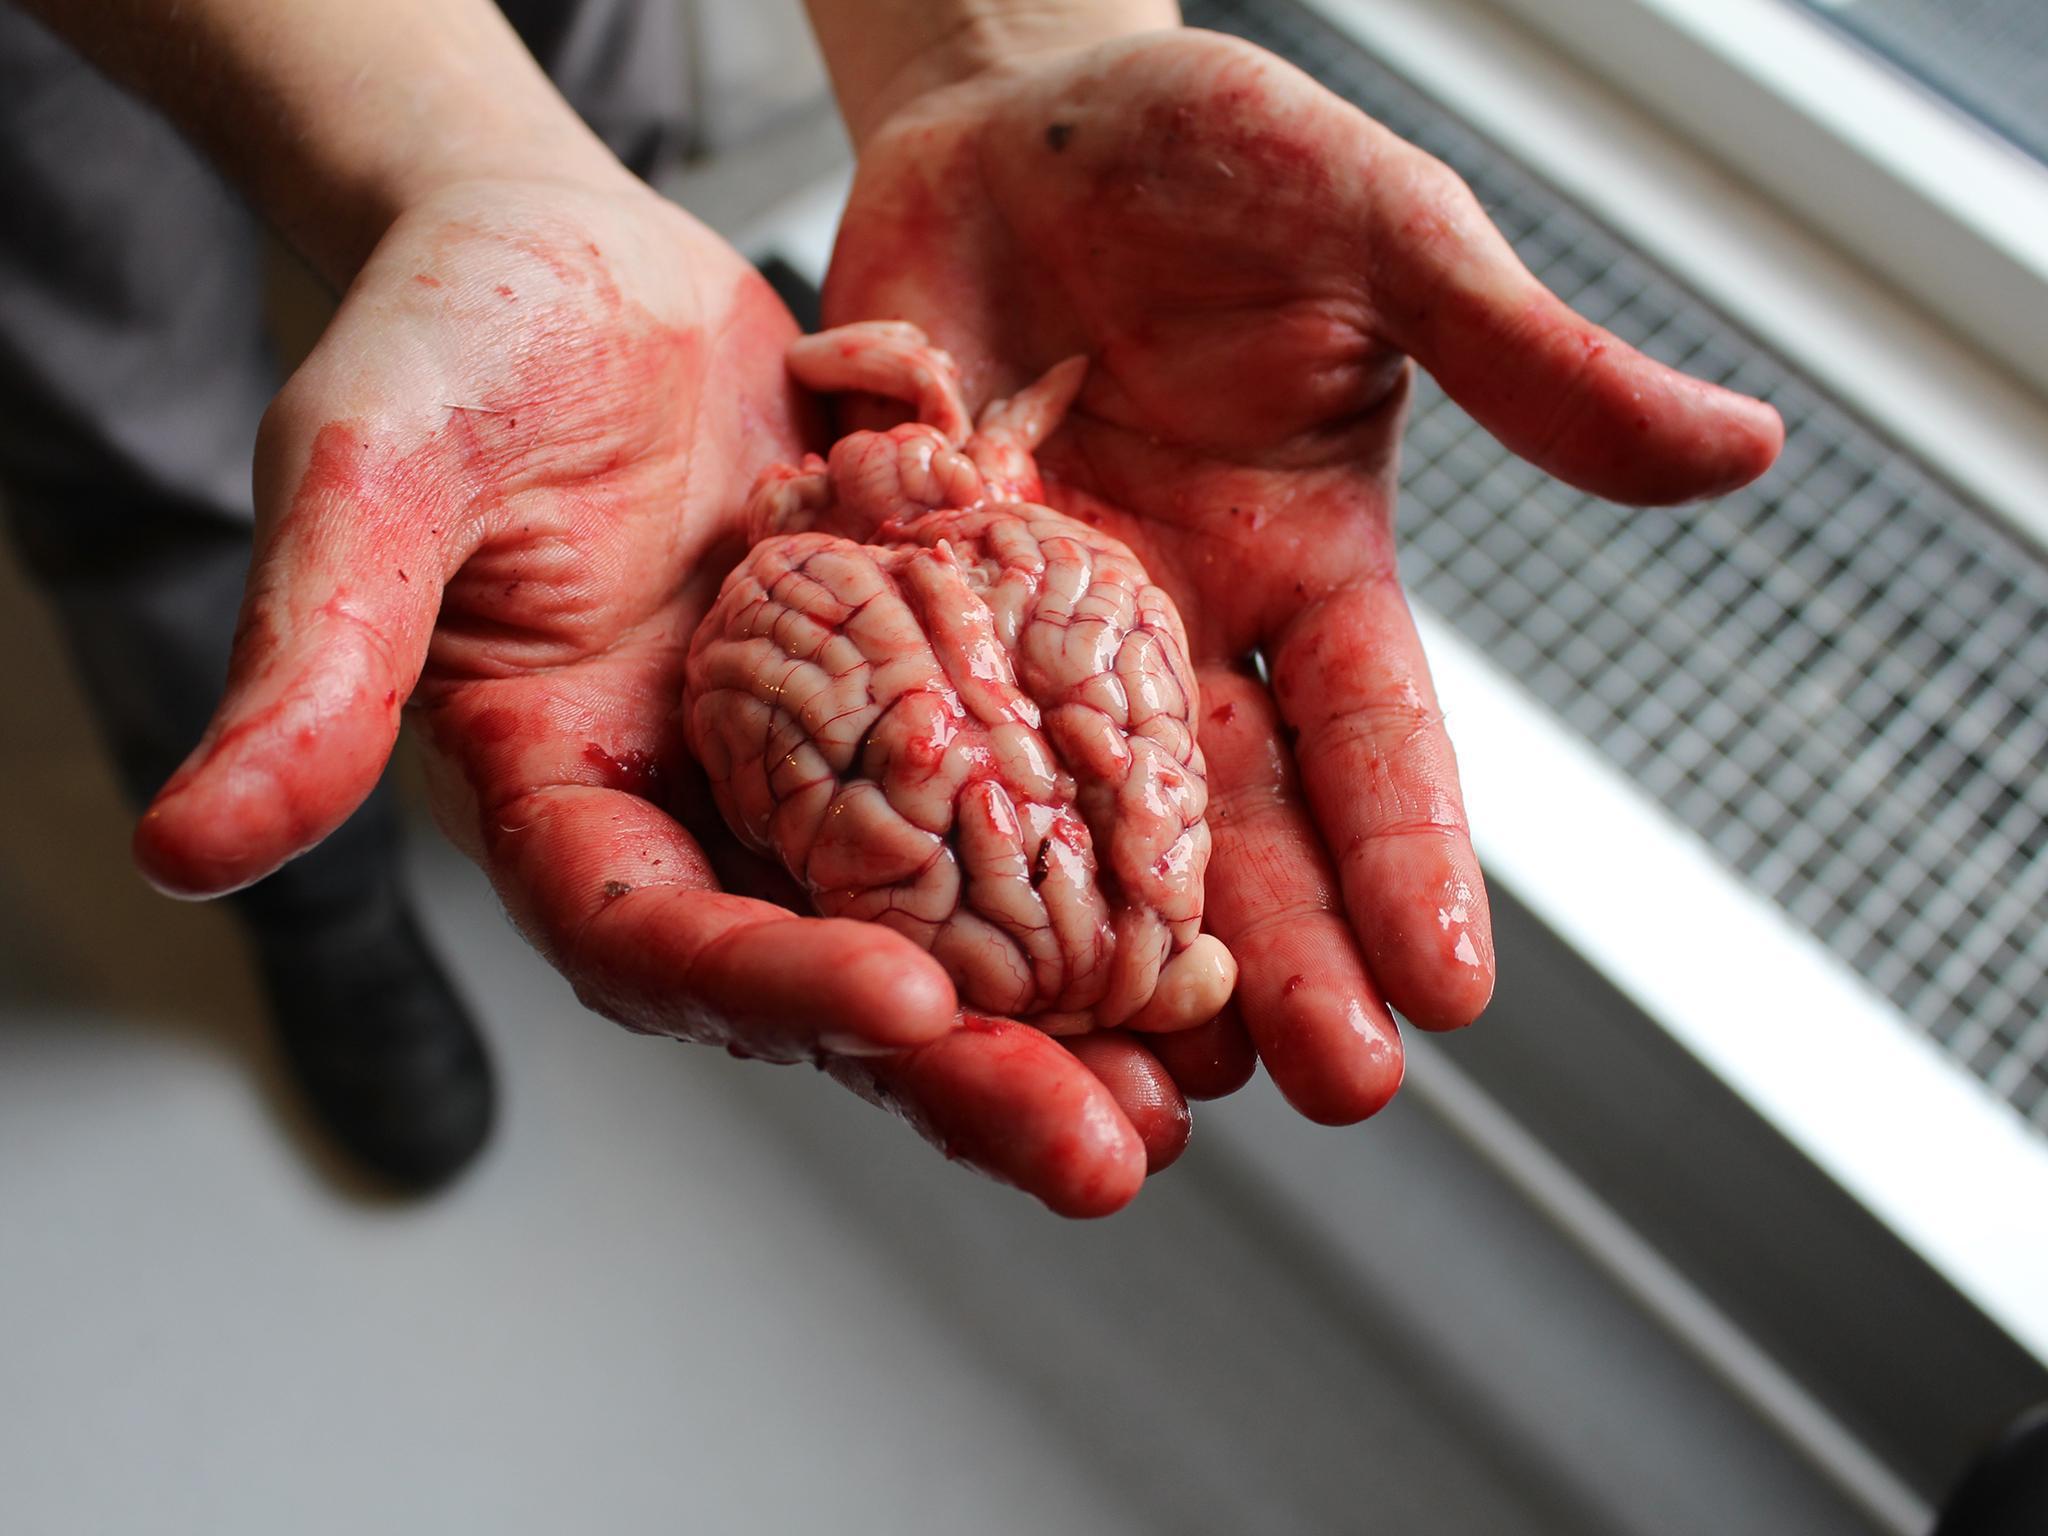 A roe deer's brain is used as part of an experiment at the Nordic Food Lab